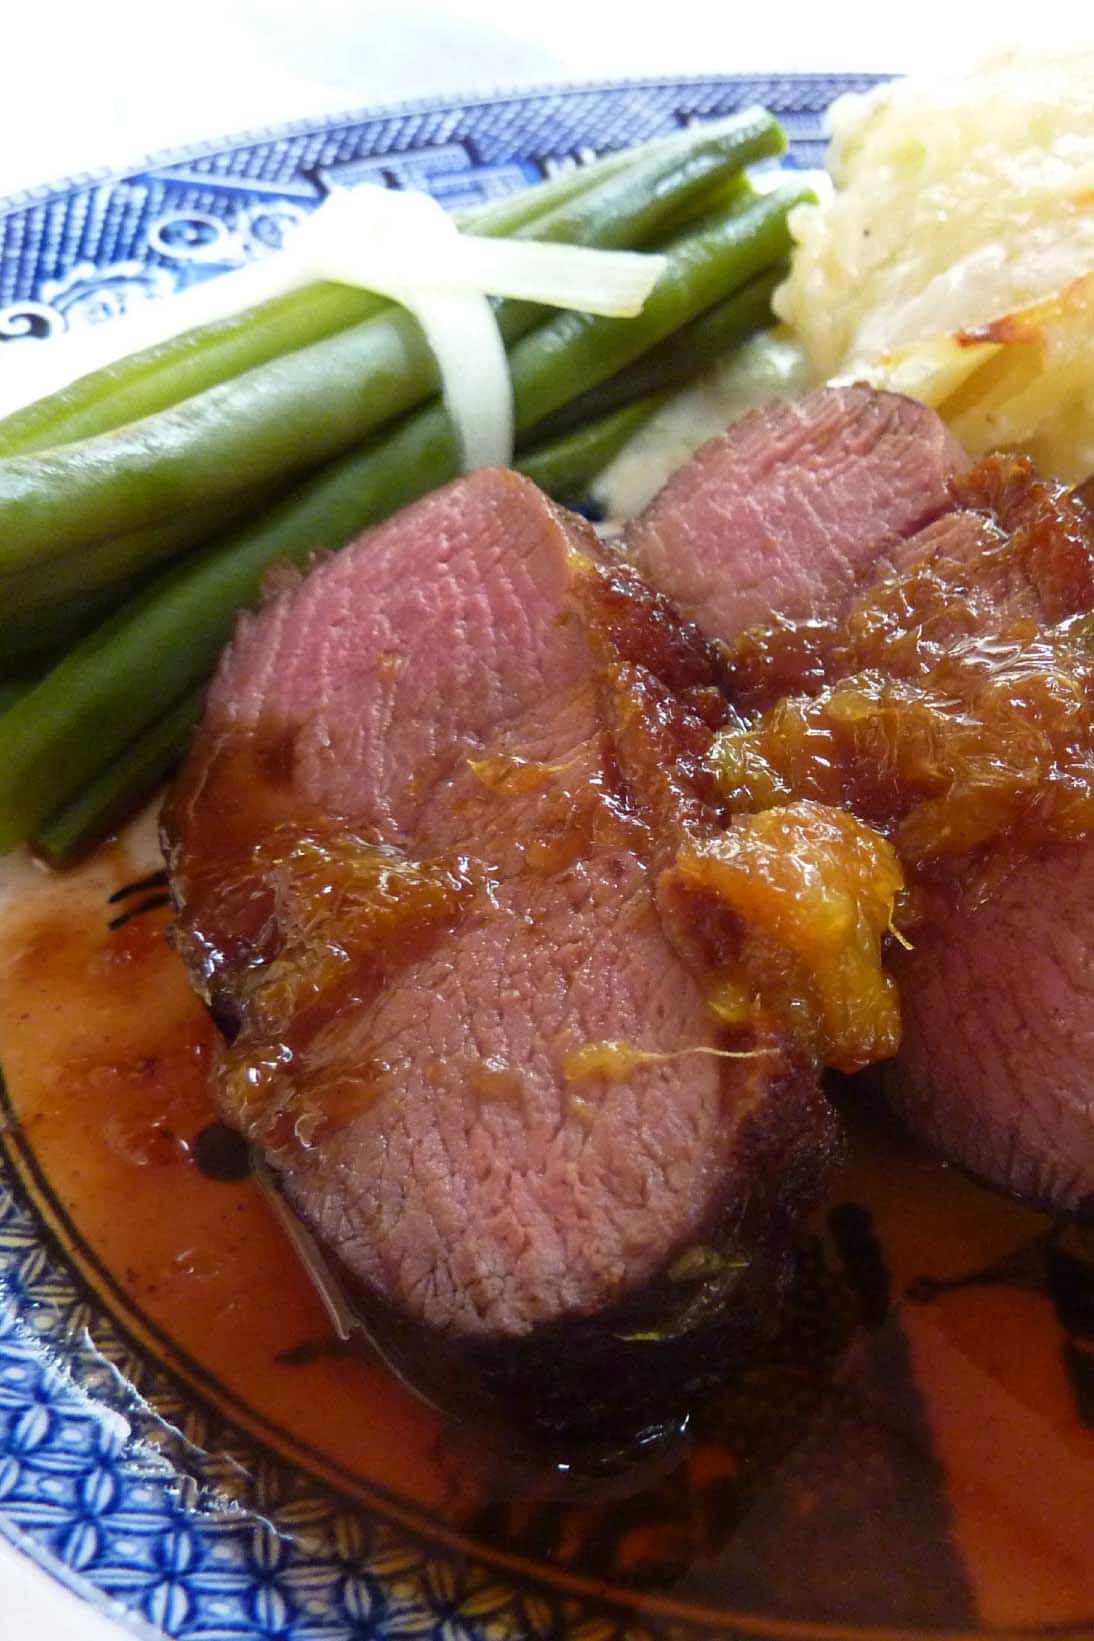 Magret de Canard served on a plate with green beans and potatoes